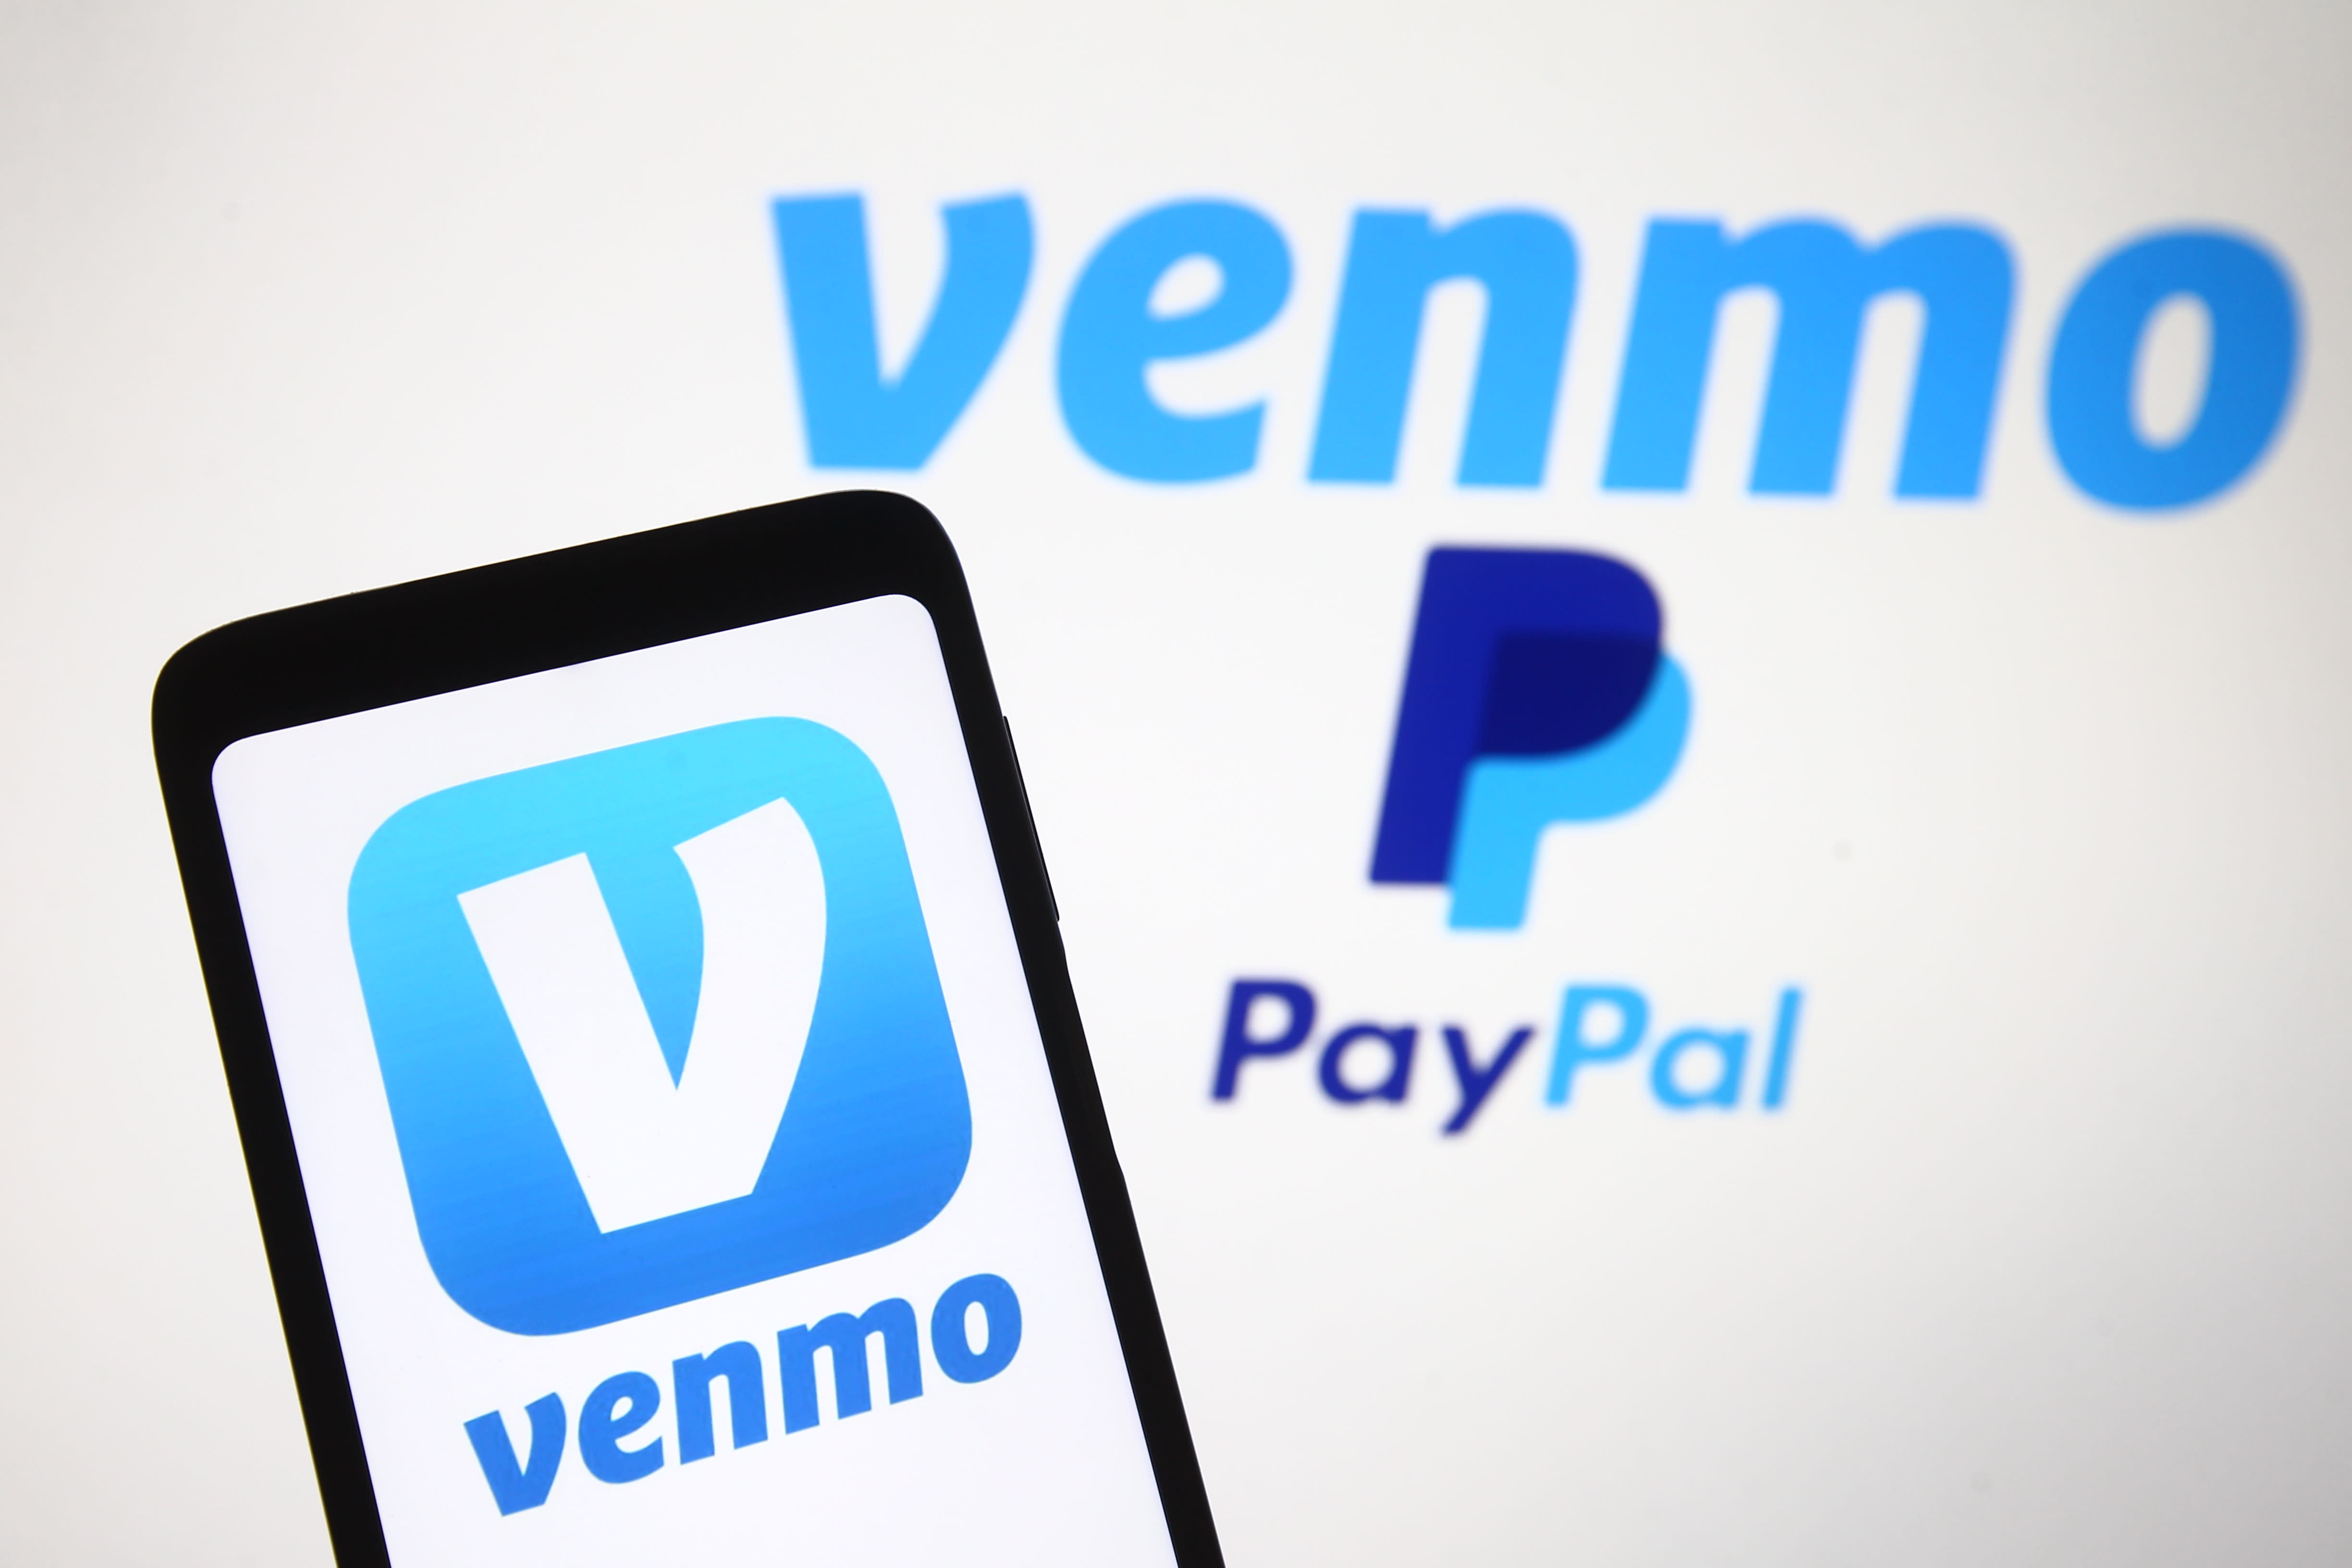 Venmo from PayPal launches the purchase and sale of cryptocurrencies